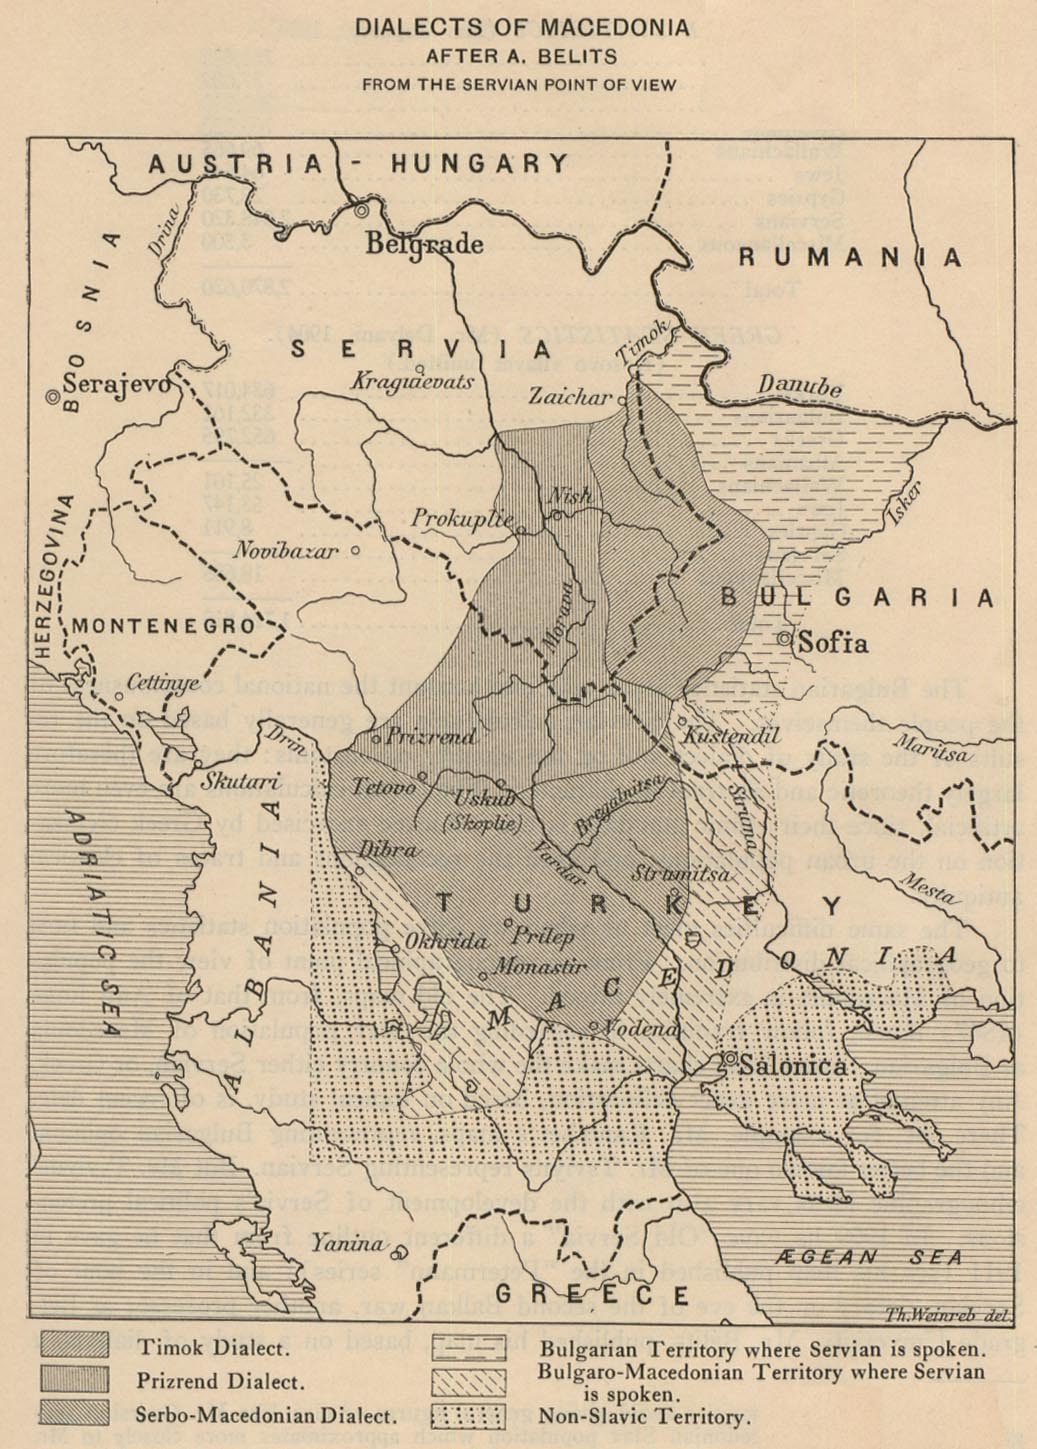 Historical Map of BalkanDialects of Macedonia From the Servian Point of View (248K)
Map from Report of the International Commission To Inquire into the Causes and Conduct of the Balkan Wars 1914.
